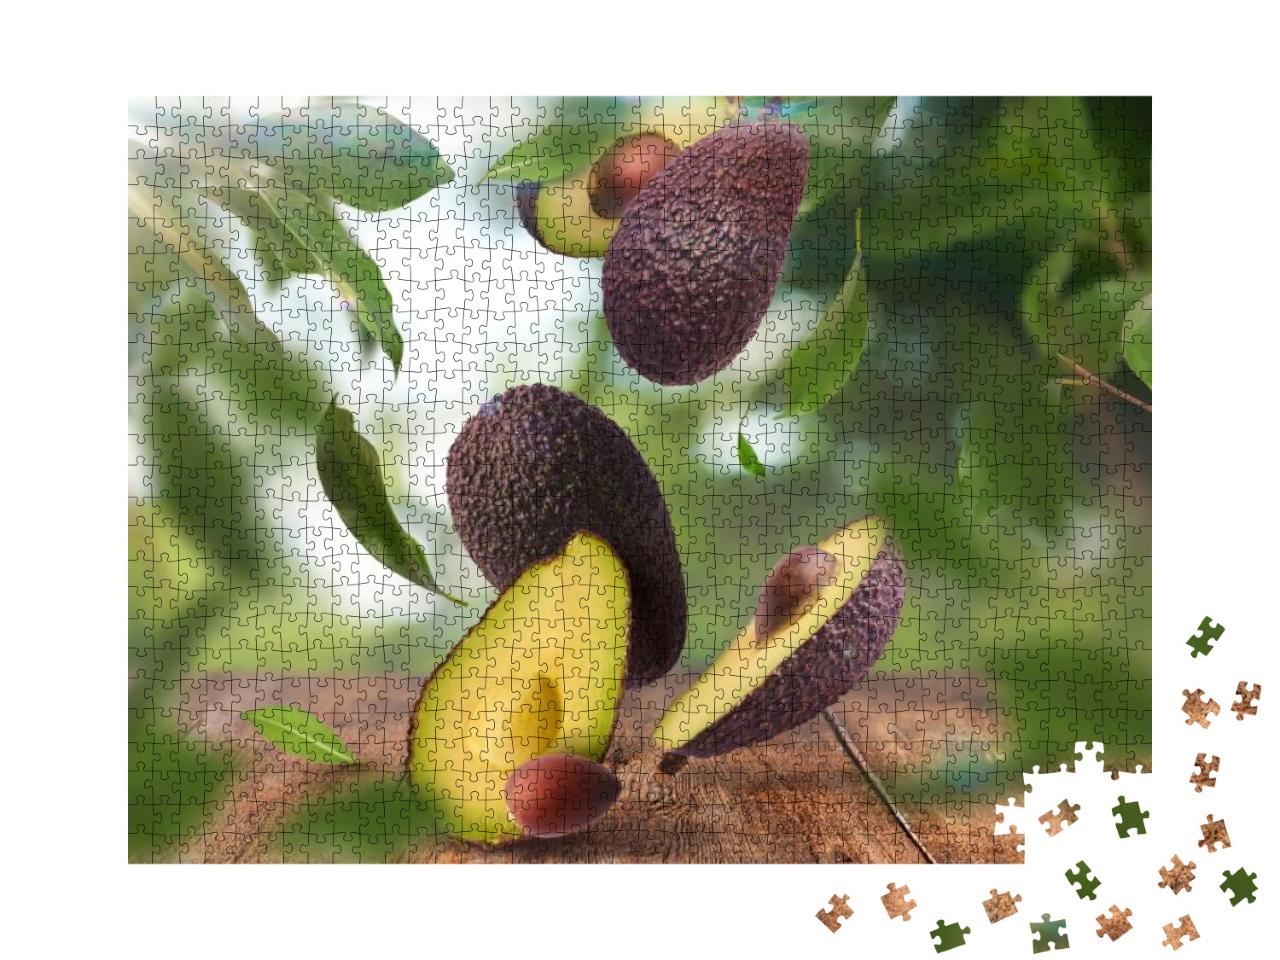 Fresh Raw Avocados Falling in the Air on Wooden Table Ove... Jigsaw Puzzle with 1000 pieces